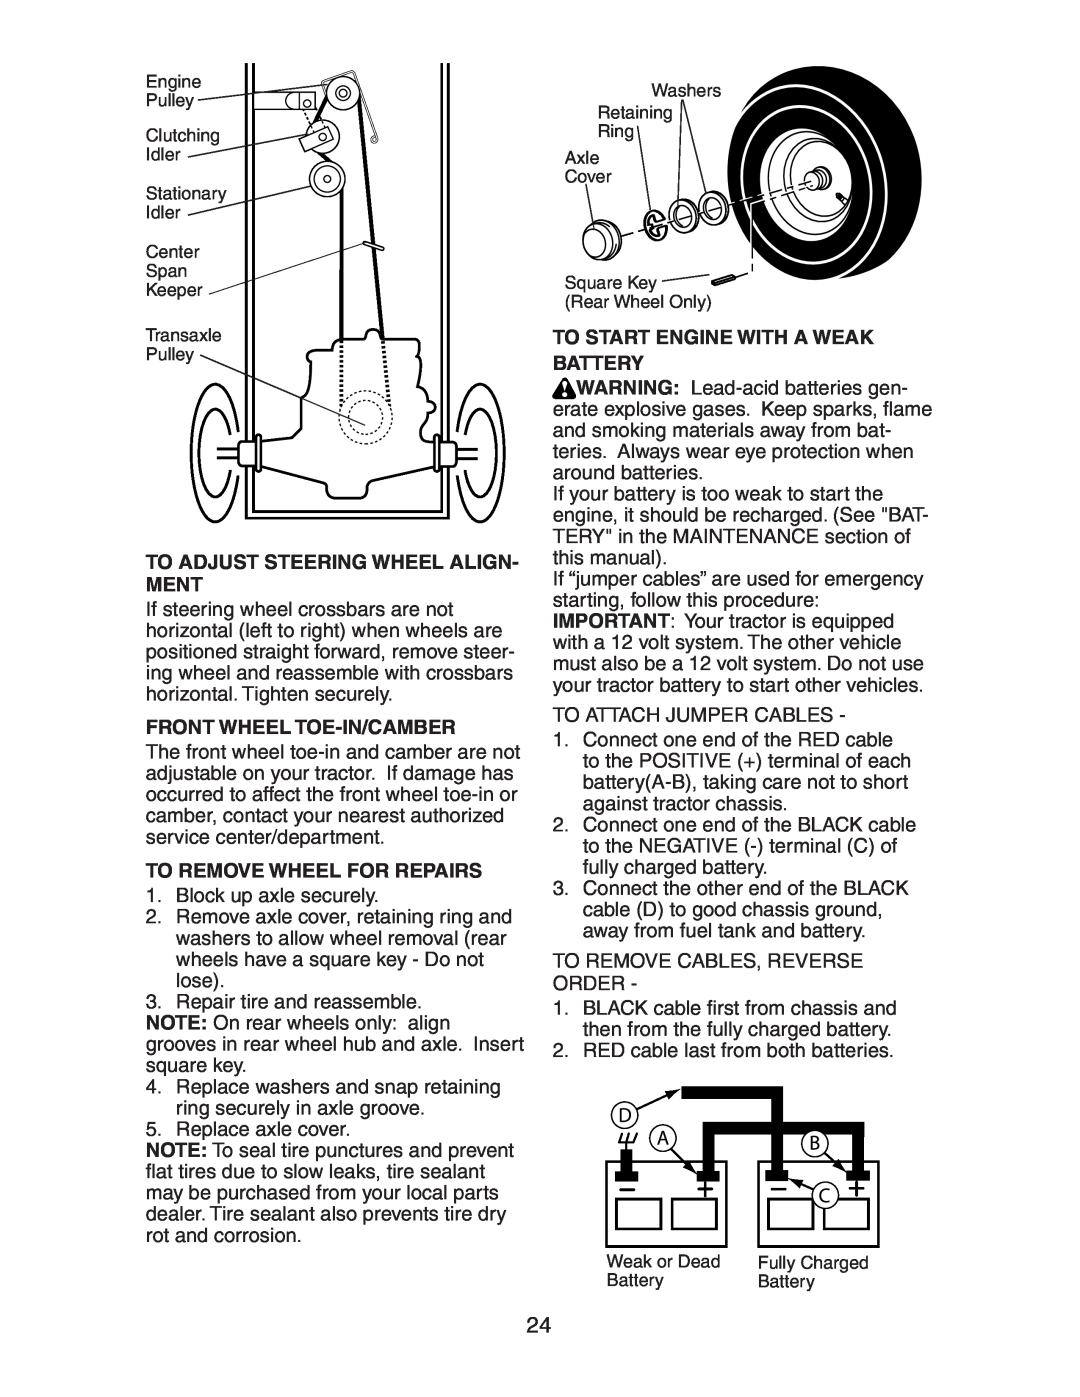 Electrolux AG17542STA manual To Adjust Steering Wheel Align- Ment, Front Wheel Toe-In/Camber, To Remove Wheel For Repairs 